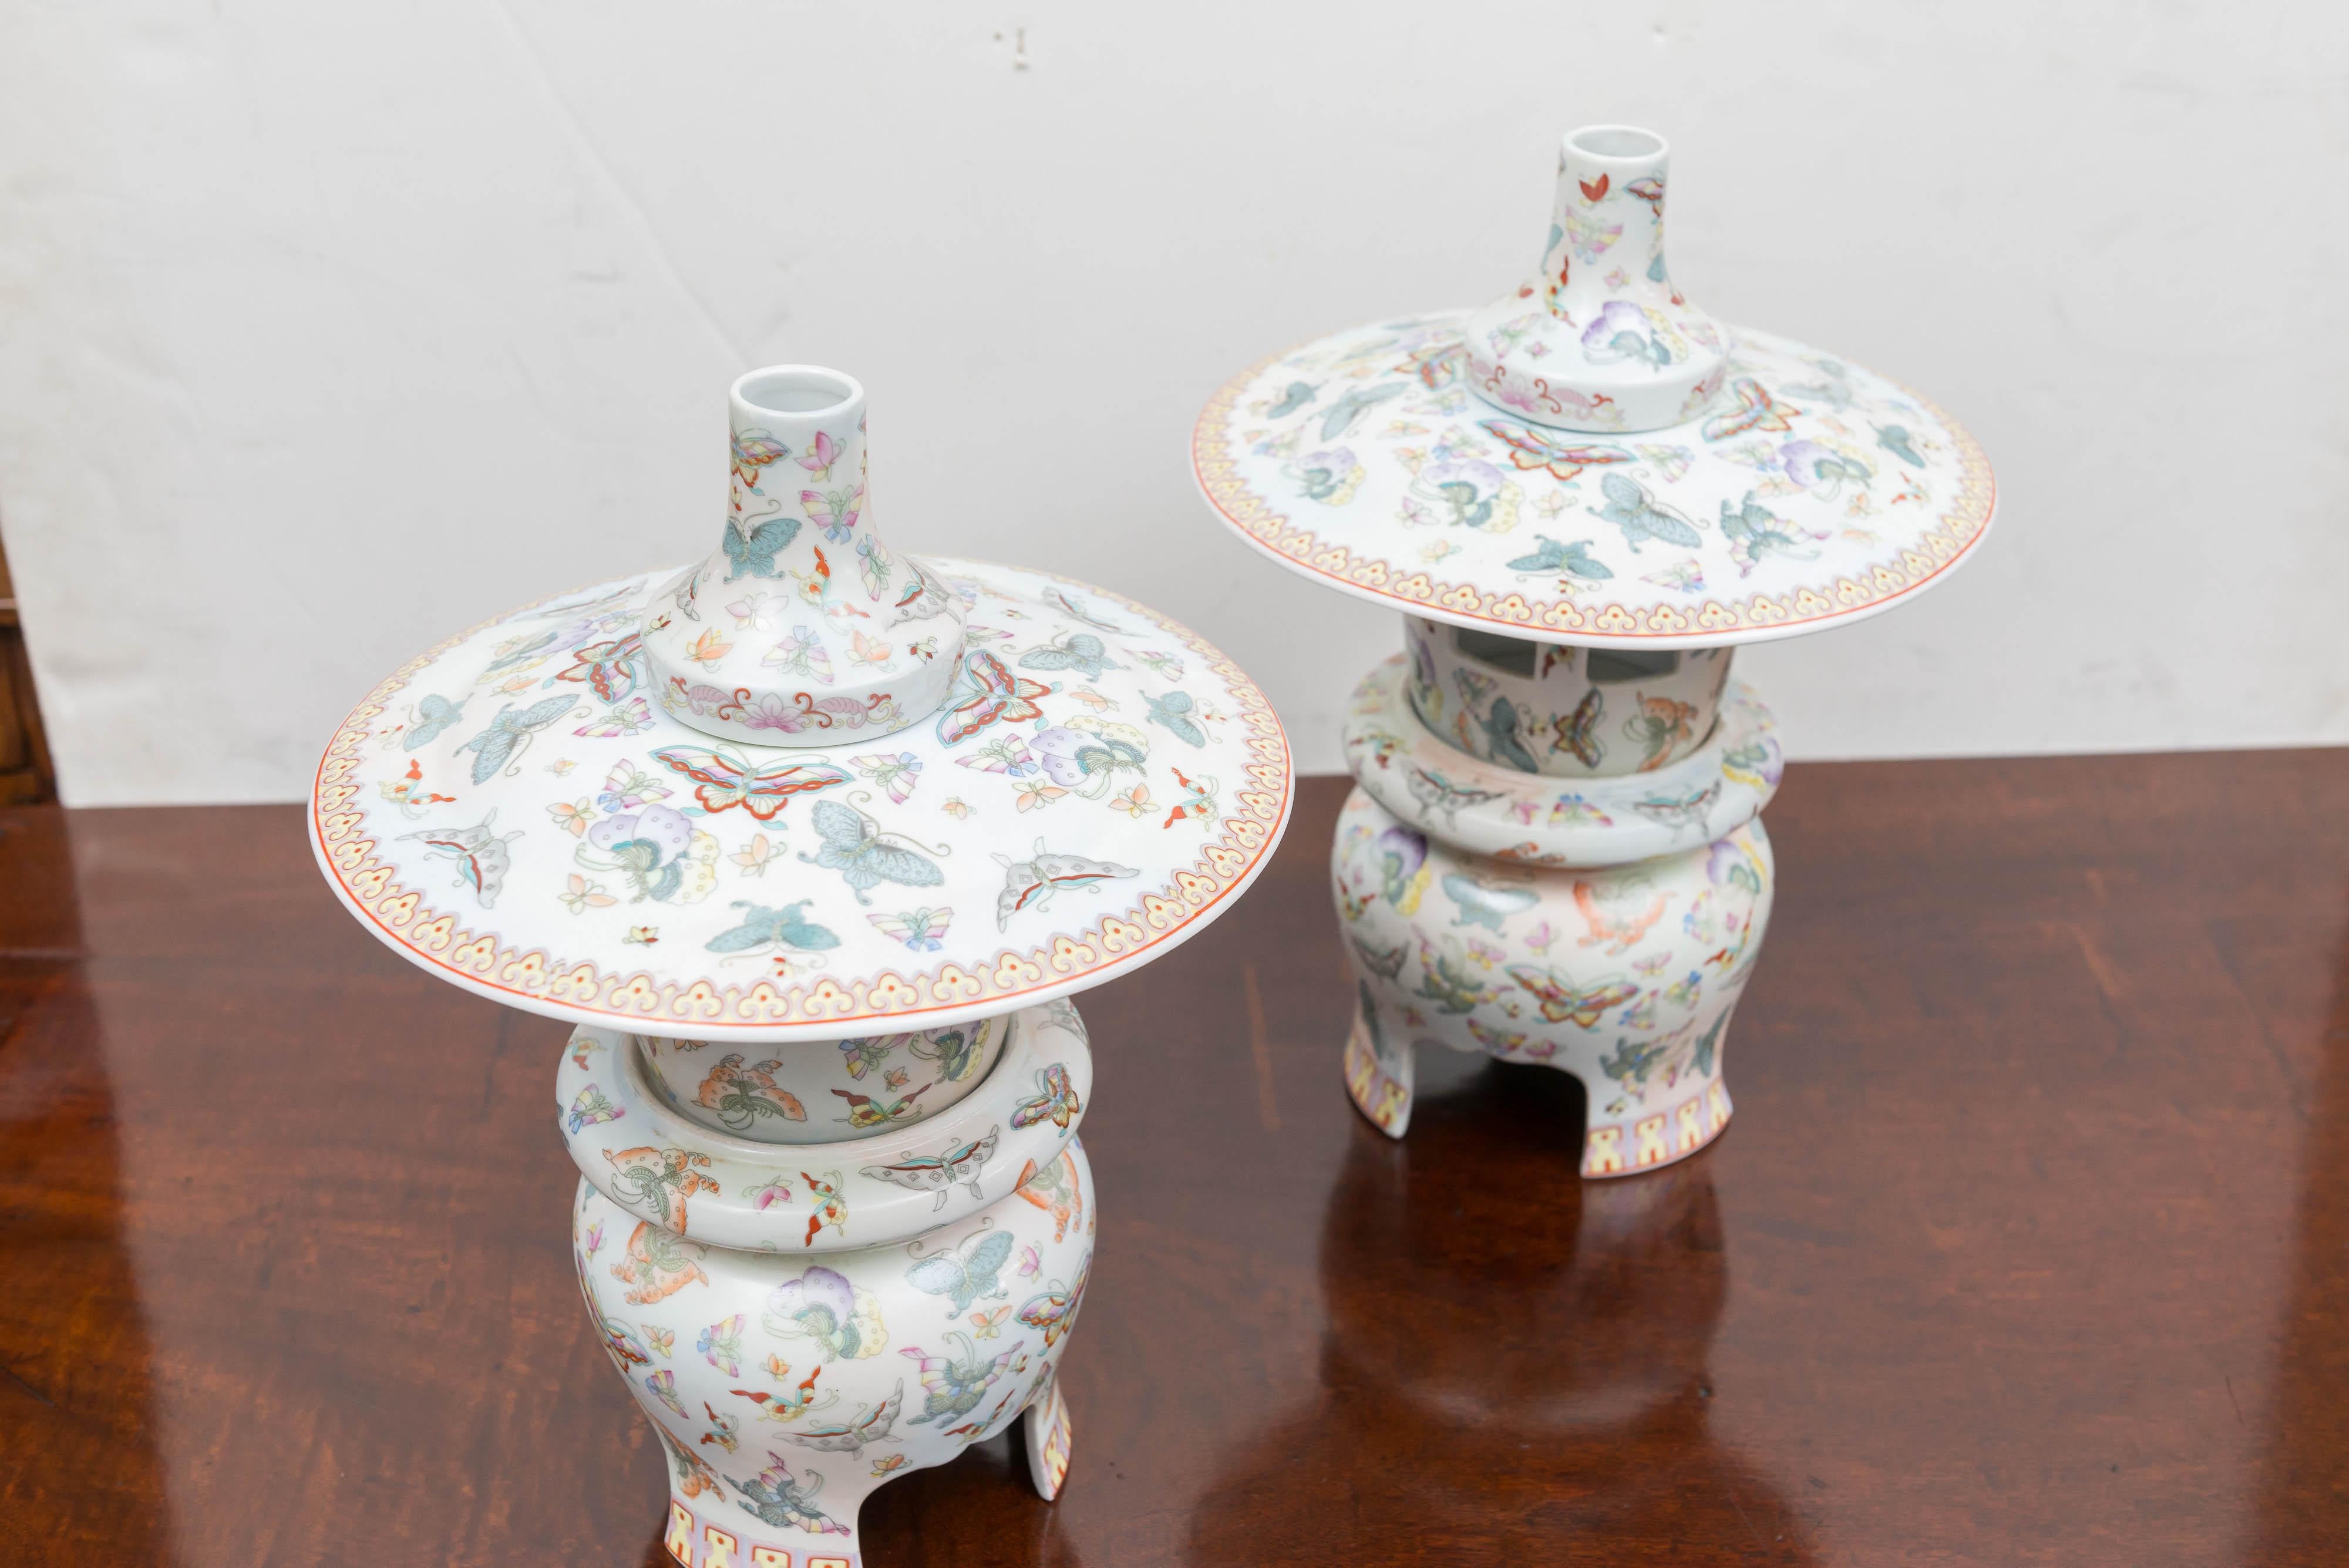 A 20th Century Chinese Porcelain Table Lantern (SINGLE ITEM) For Sale 2